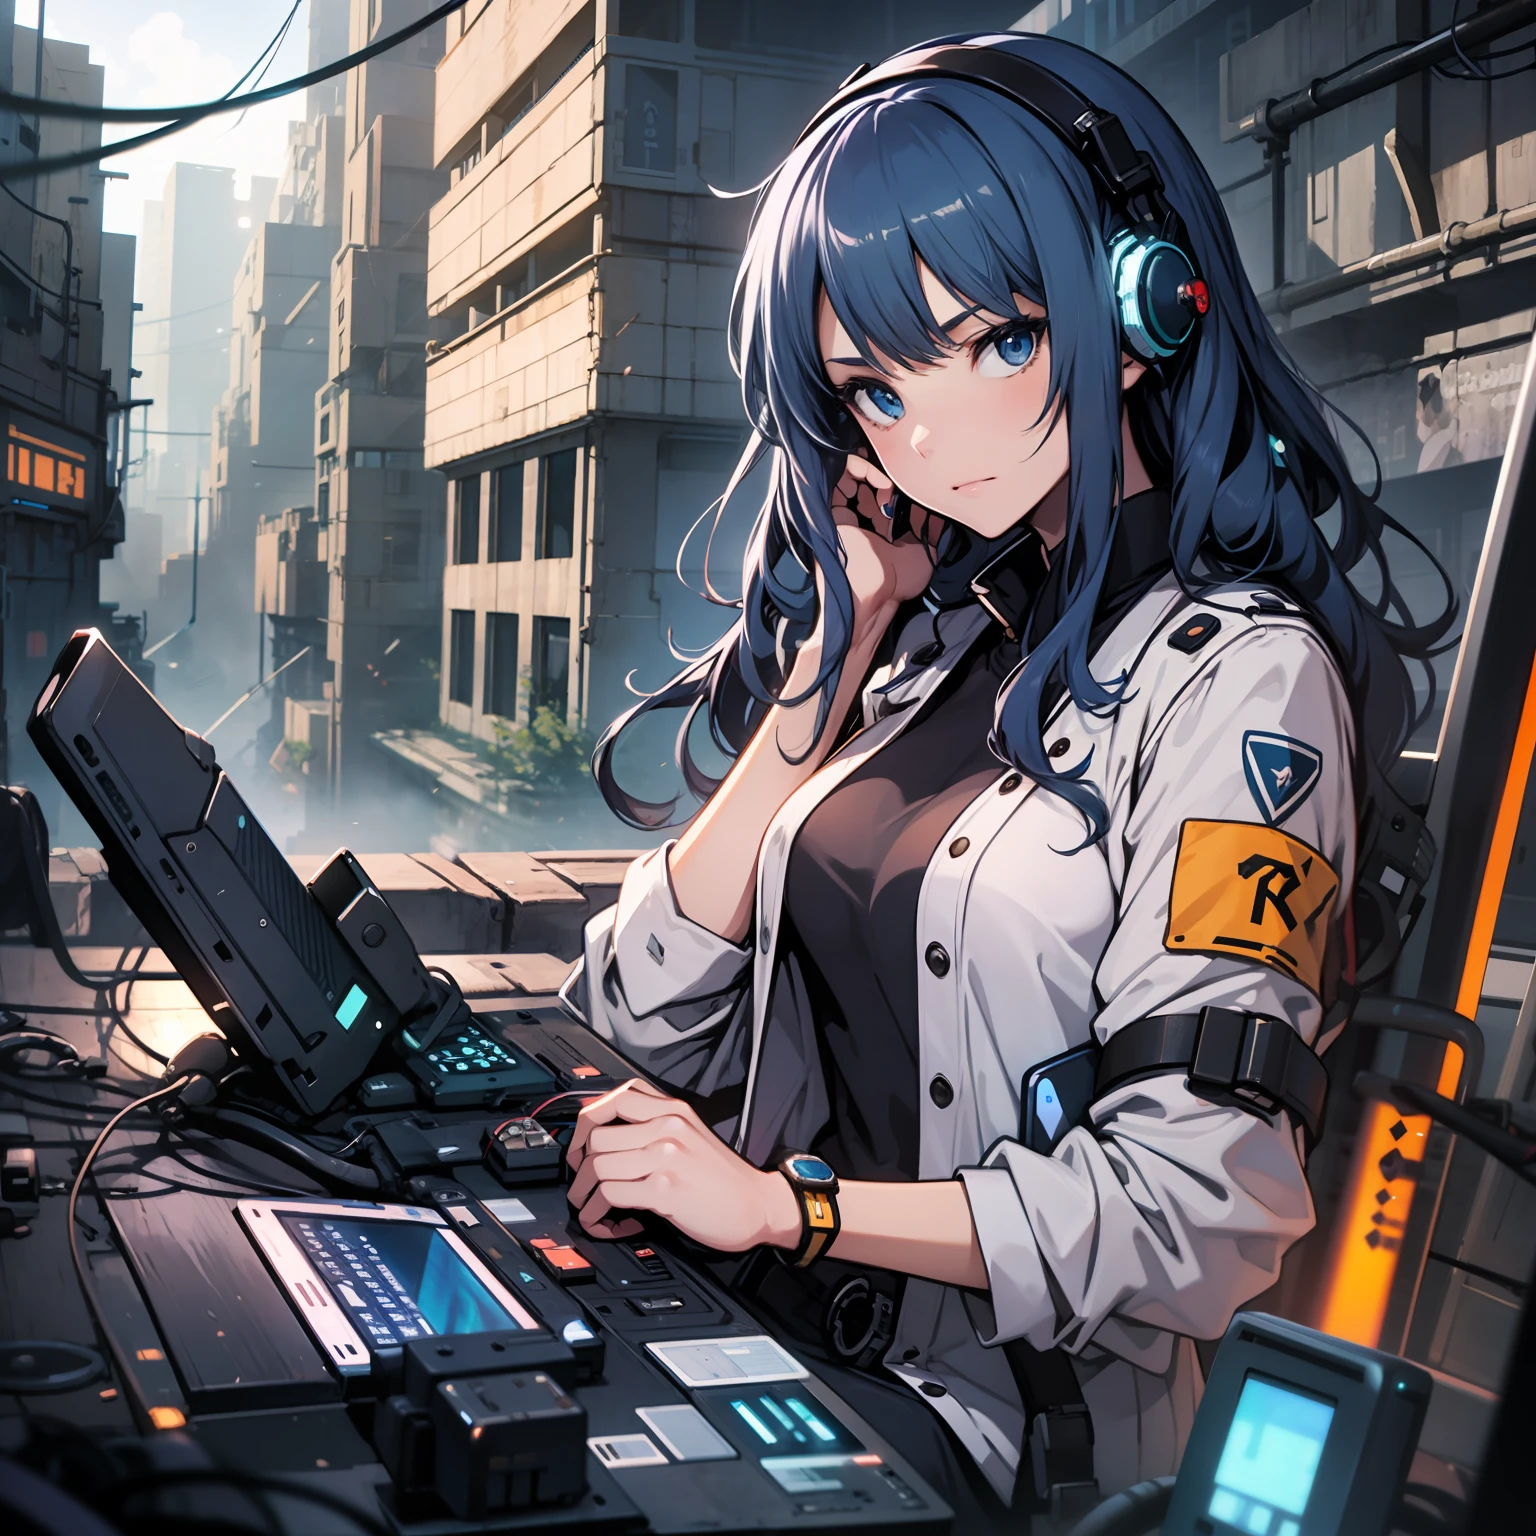 Wallpaper : blonde, anime girls, vehicle, airplane, Brave Witches,  Eurofighter Typhoon, military aircraft, Toy, air force, Flight, aviation,  wing, screenshot, mecha, computer wallpaper, atmosphere of earth, fighter  aircraft, aircraft engine, aerospace ...